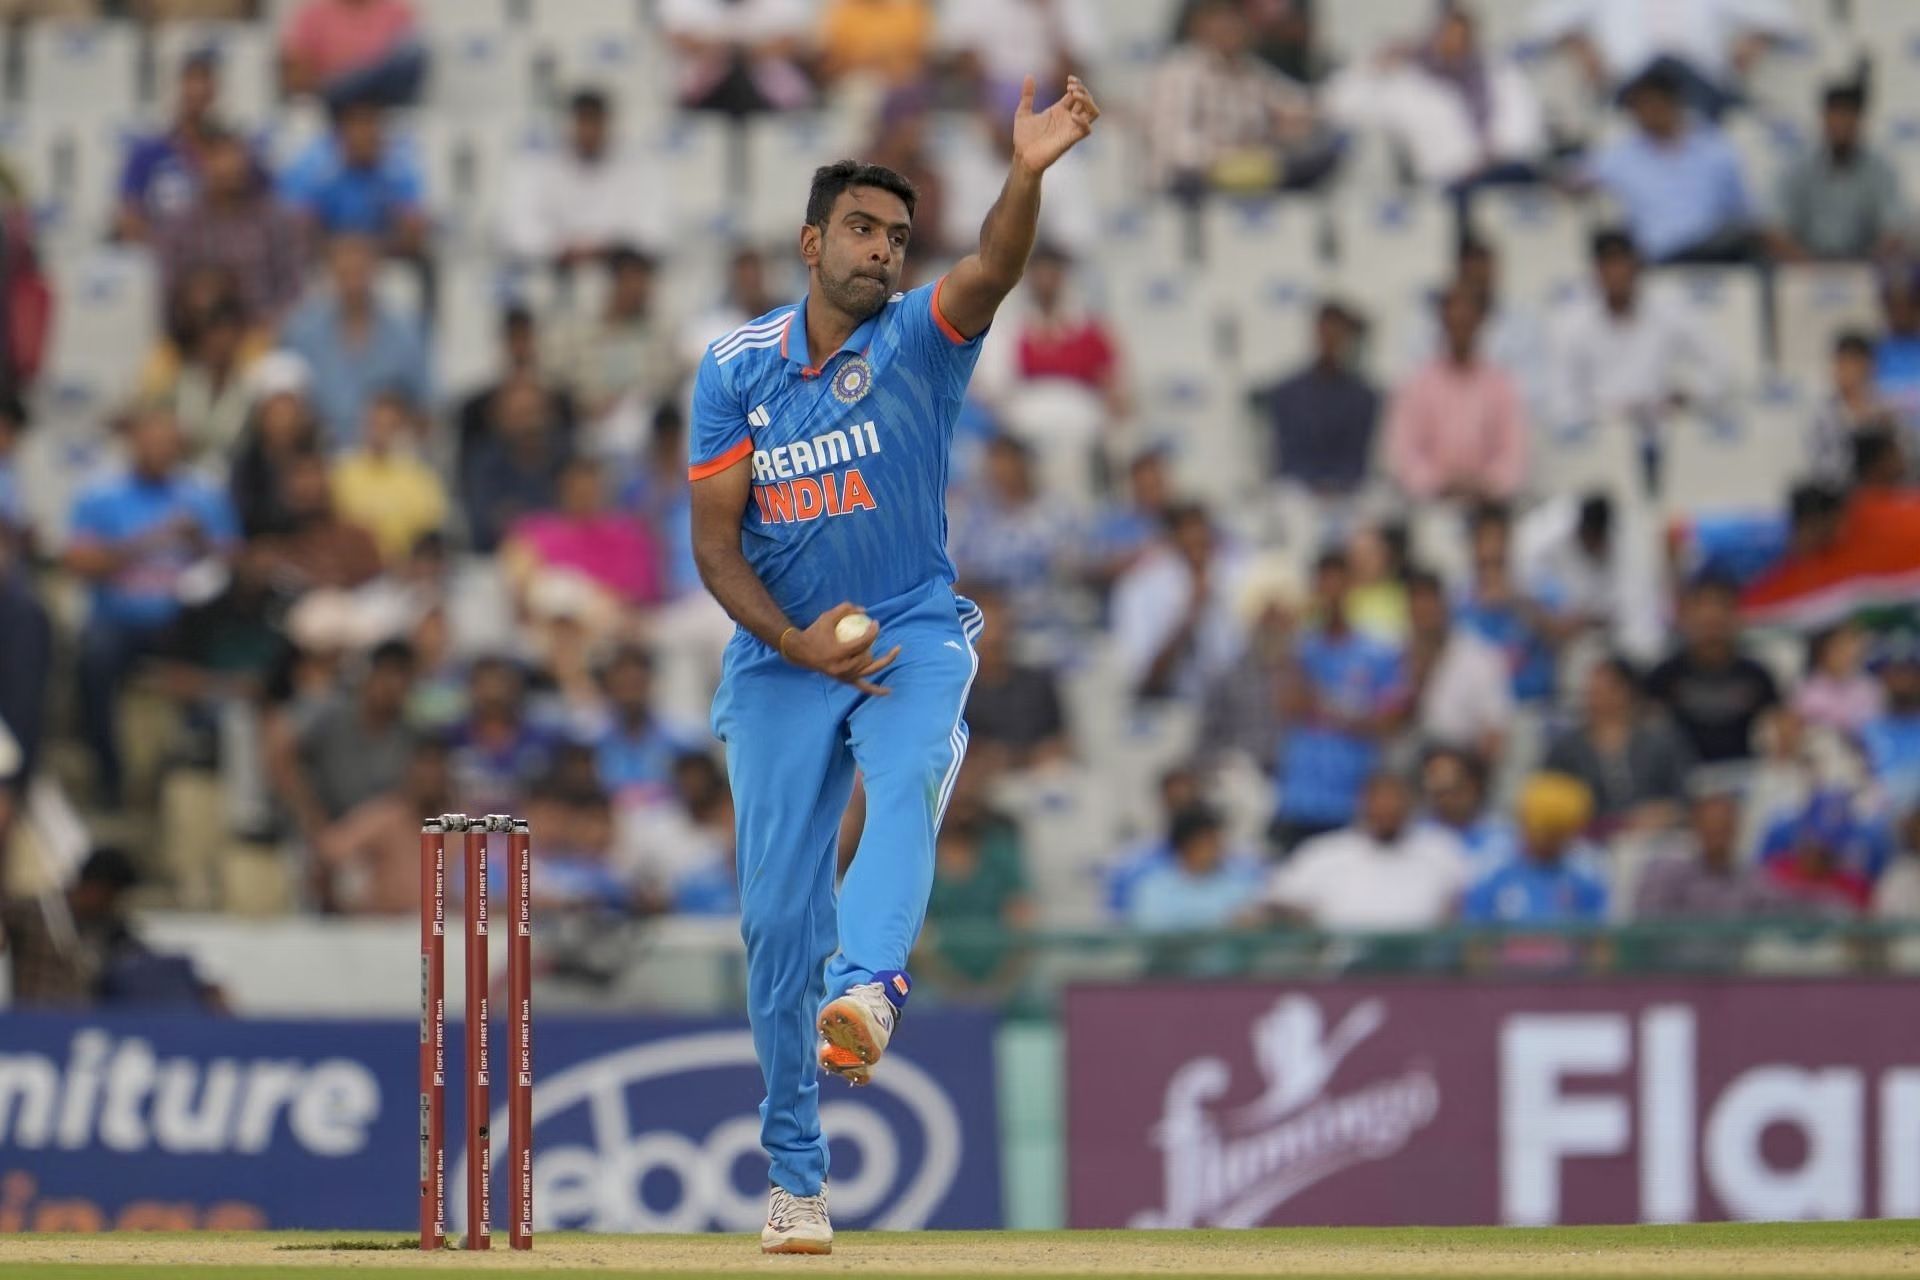 Ravichandran Ashwin bowled a decent spell in India